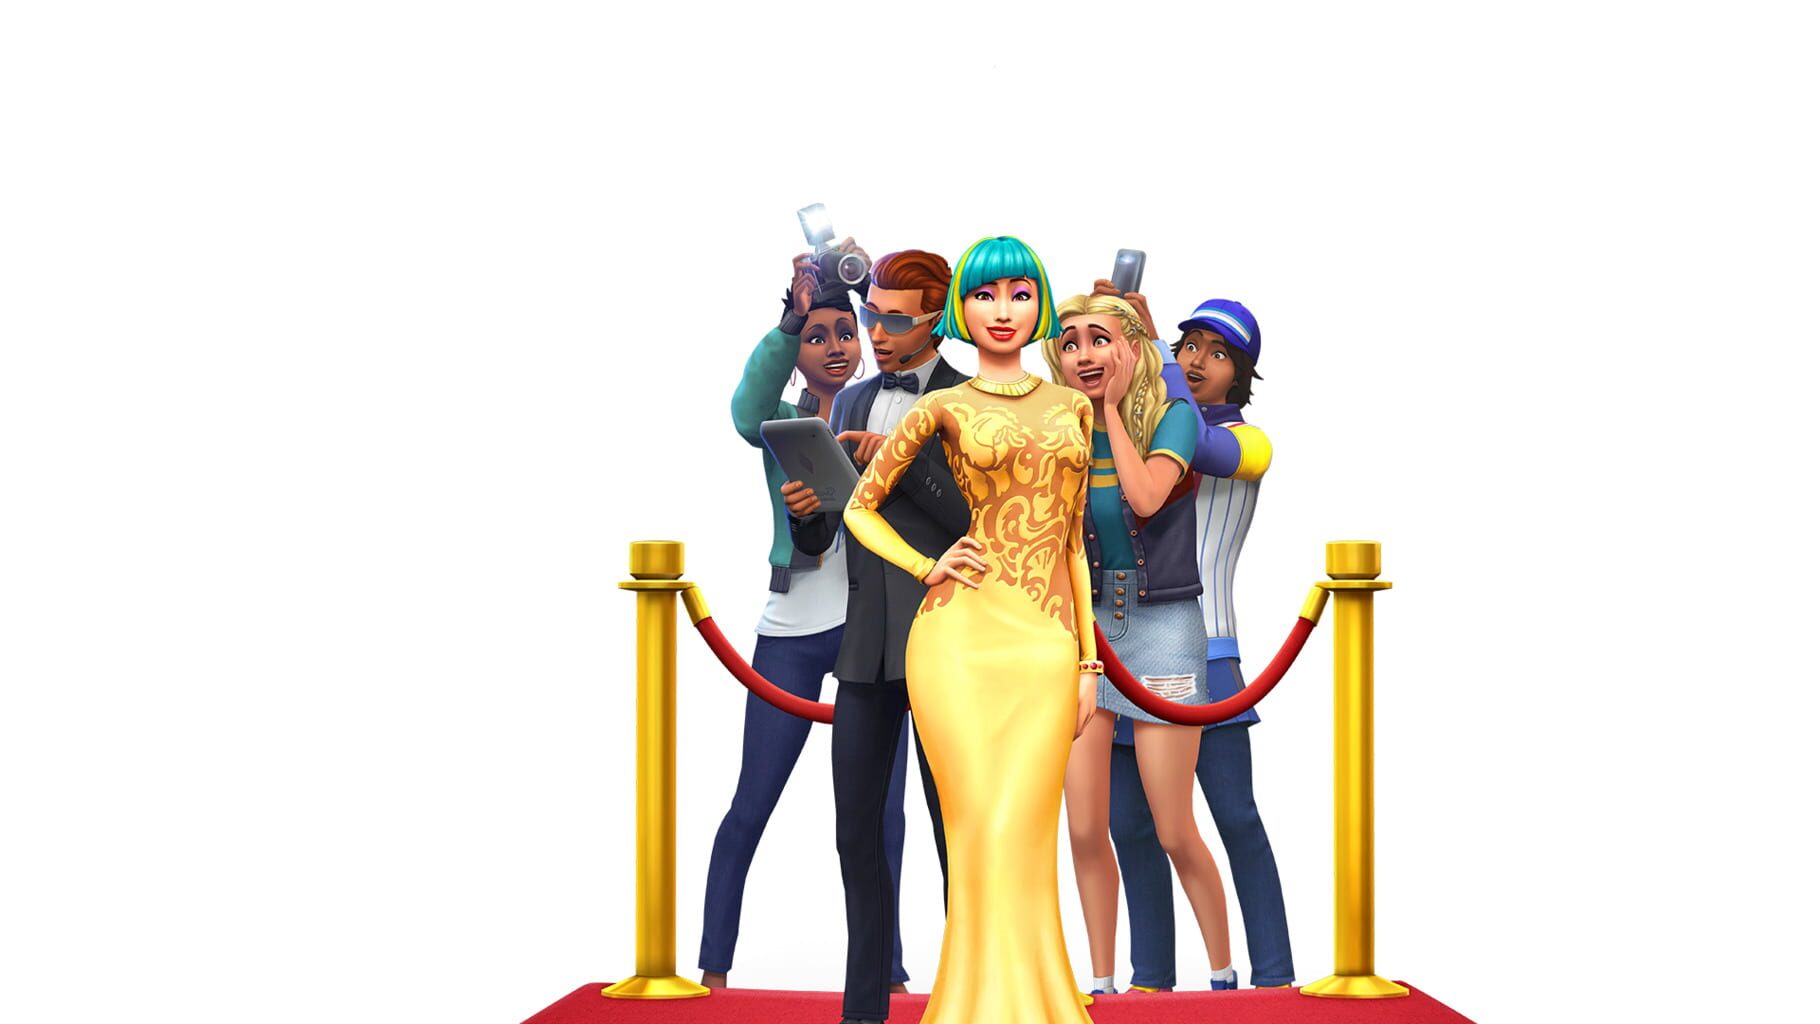 Arte - The Sims 4: Get Famous